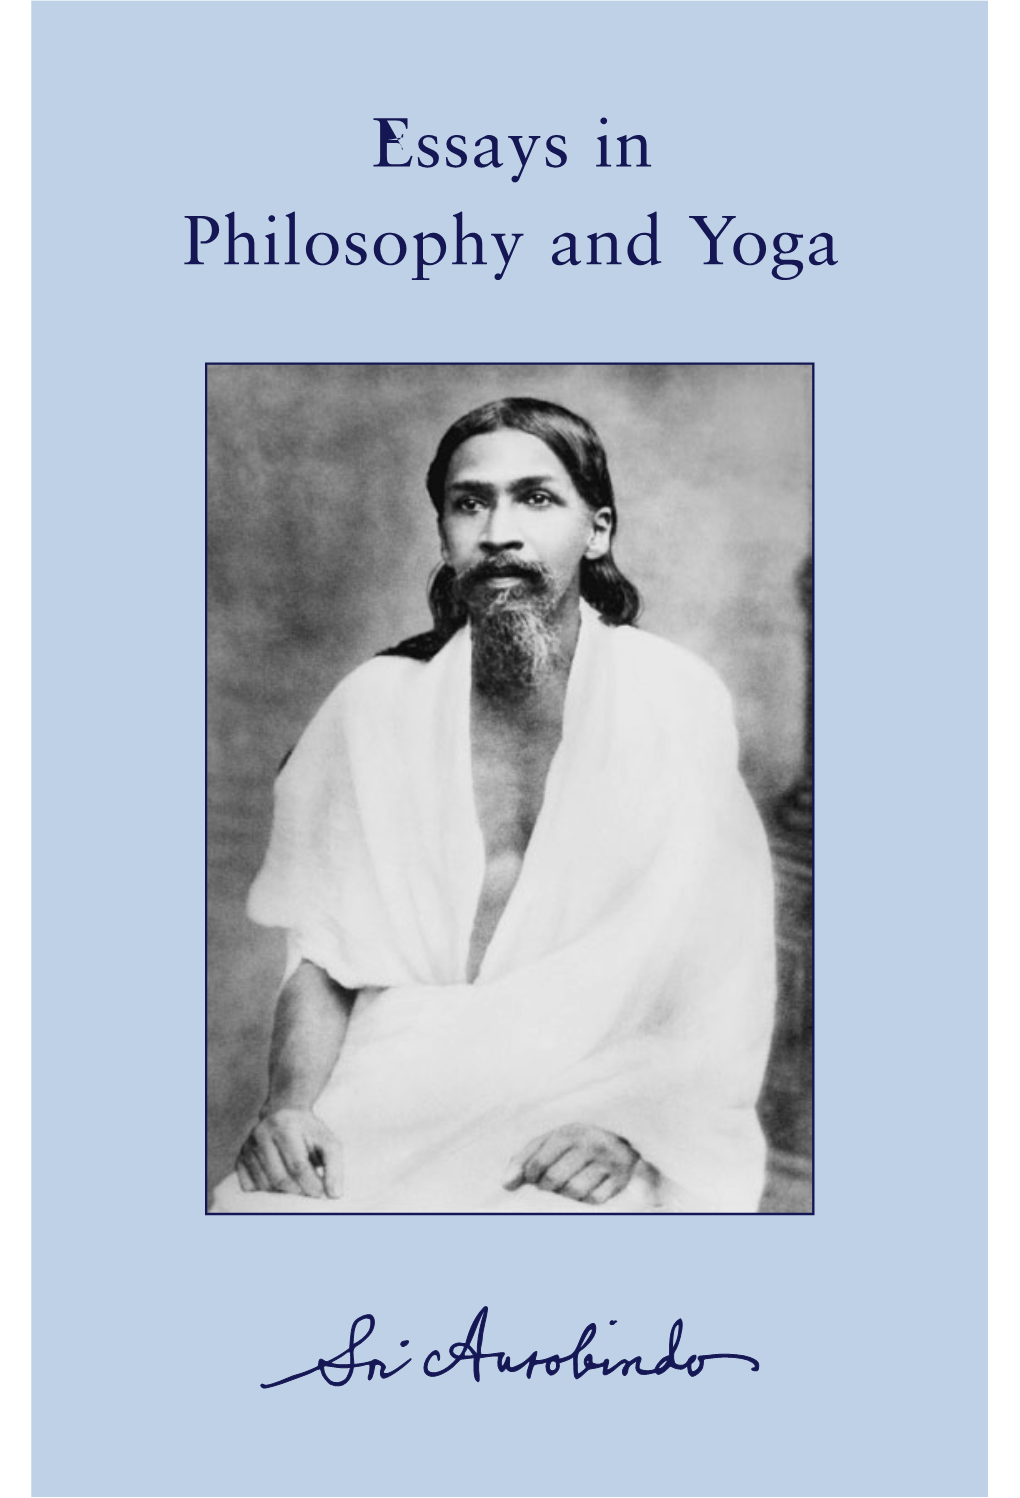 Essays in Philosophy and Yoga